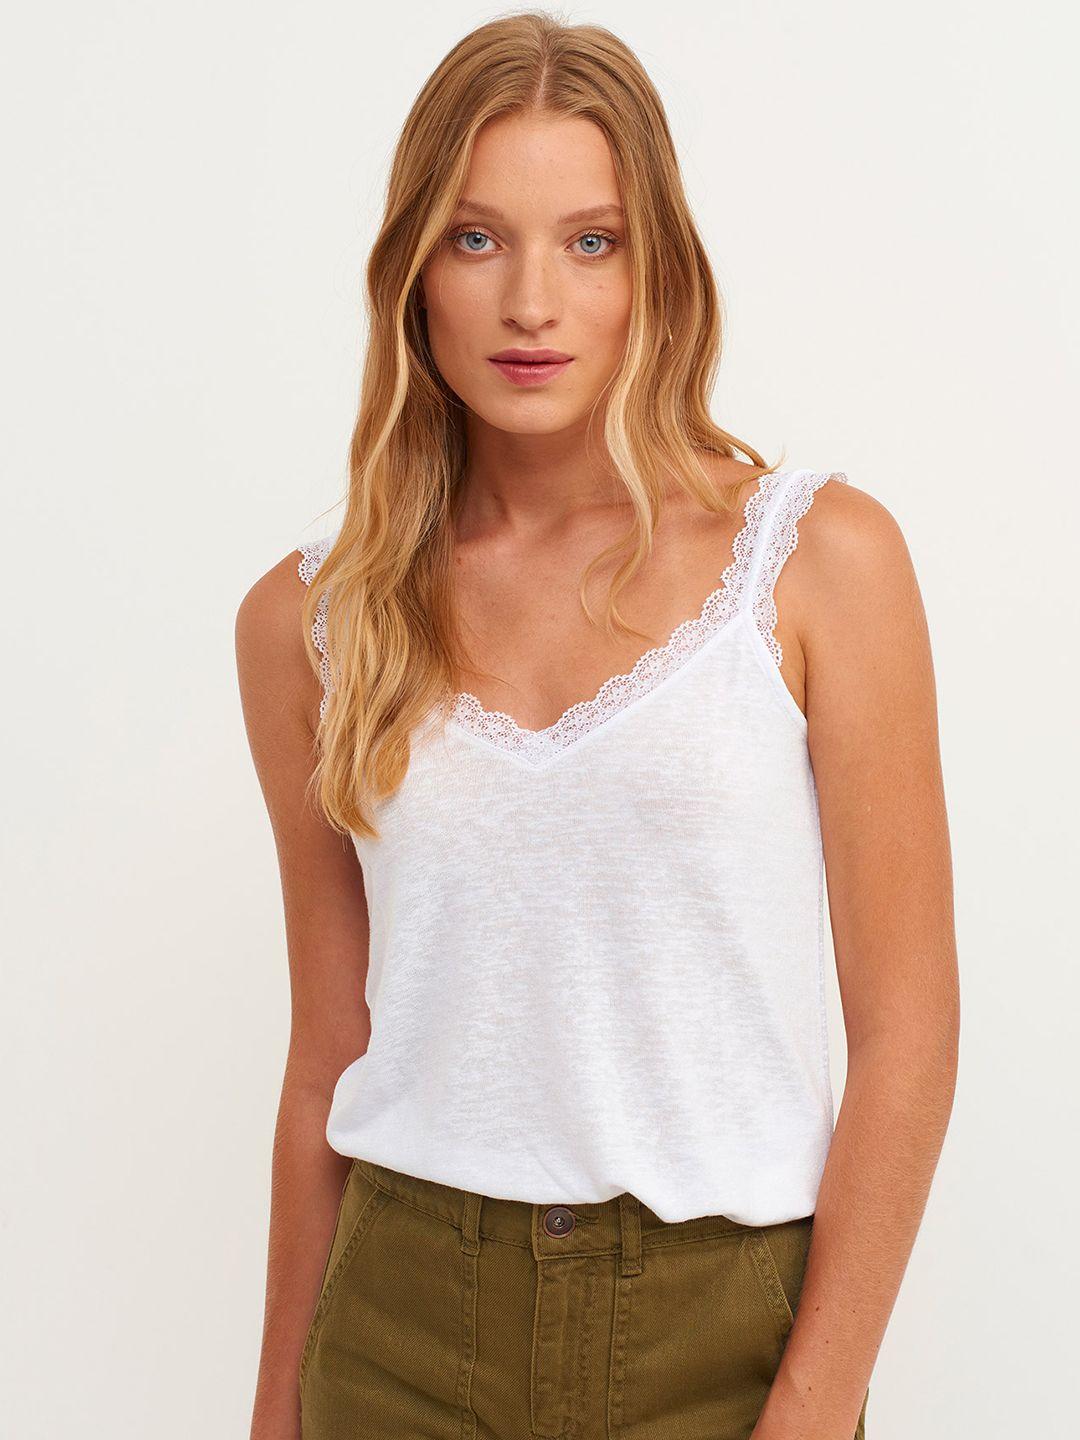 oxxo x bohemian white solid top with lace inserts